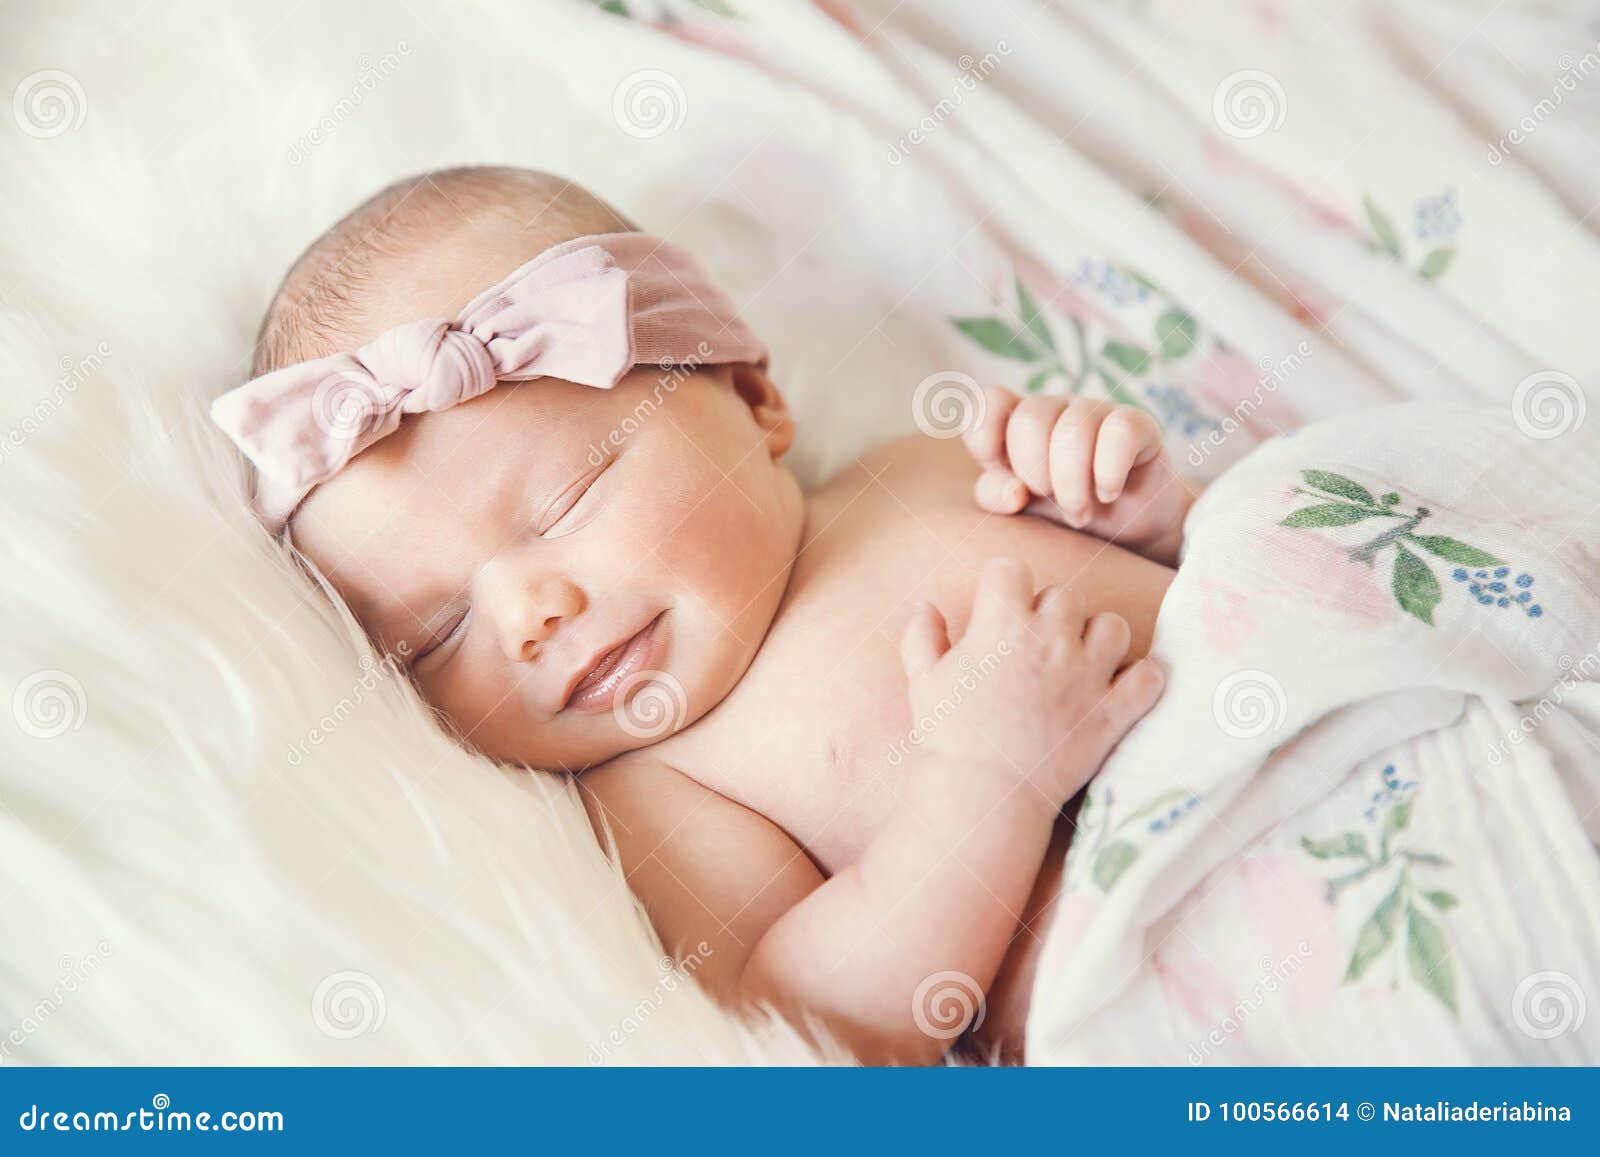 Sleeping Smiling Newborn Baby In A Wrap On White Blanket 